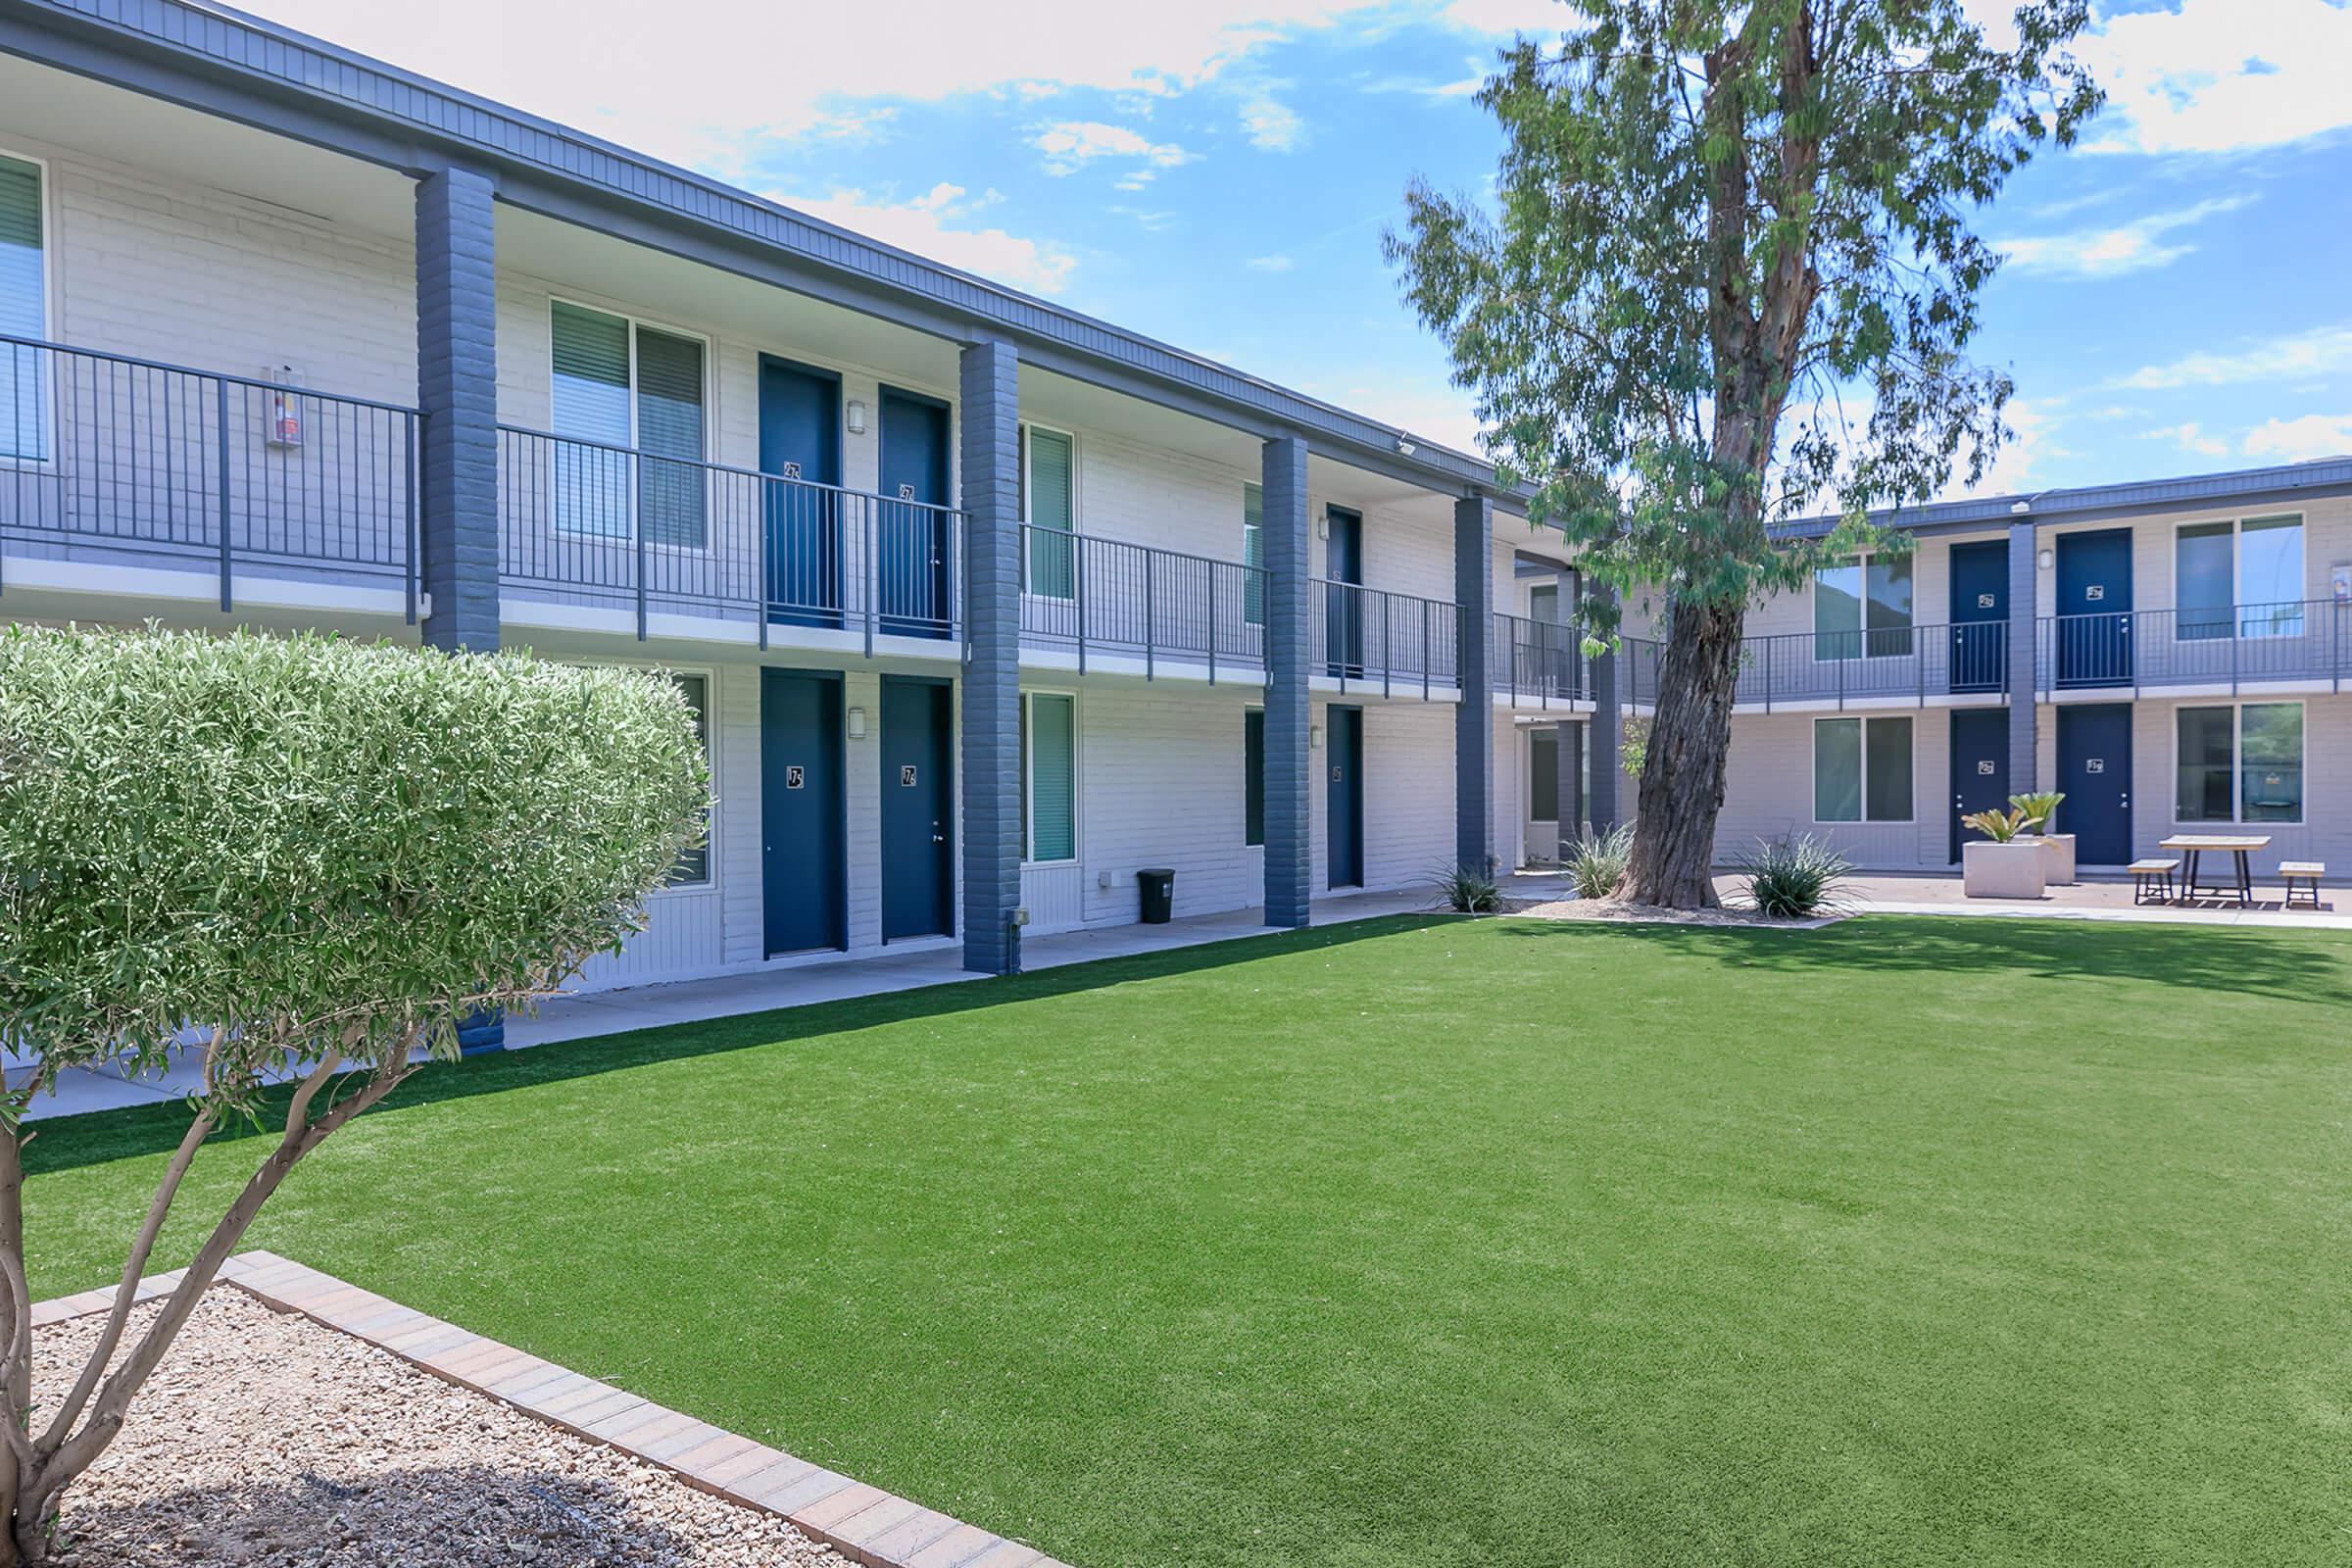 Outdoor grassy courtyard area in front of a two-story Rise Canyon West apartment building